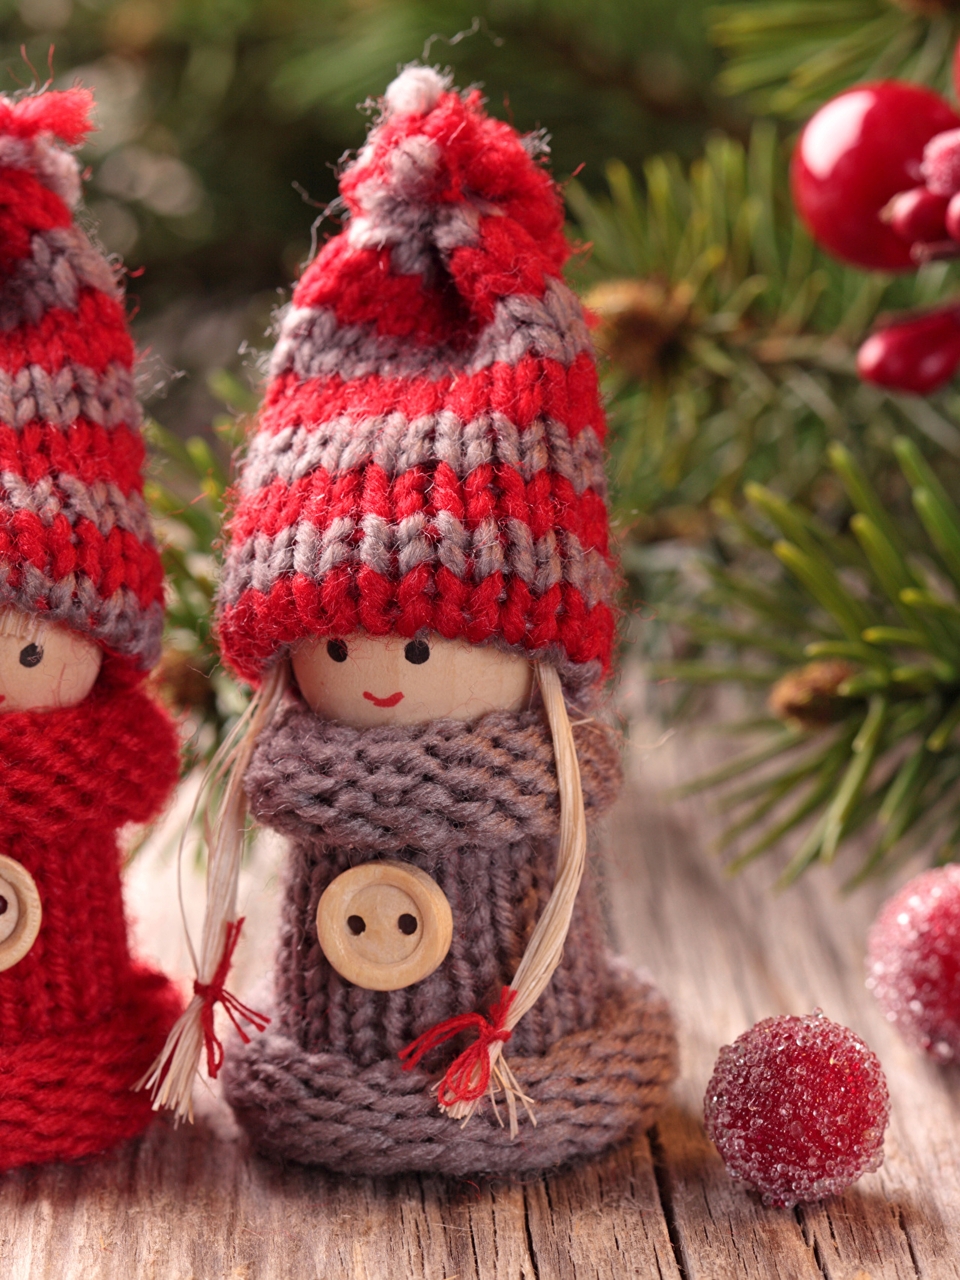 Image: Doll, toy, winter, knitted, hat, sprig, spruce, decoration, new year, Christmas